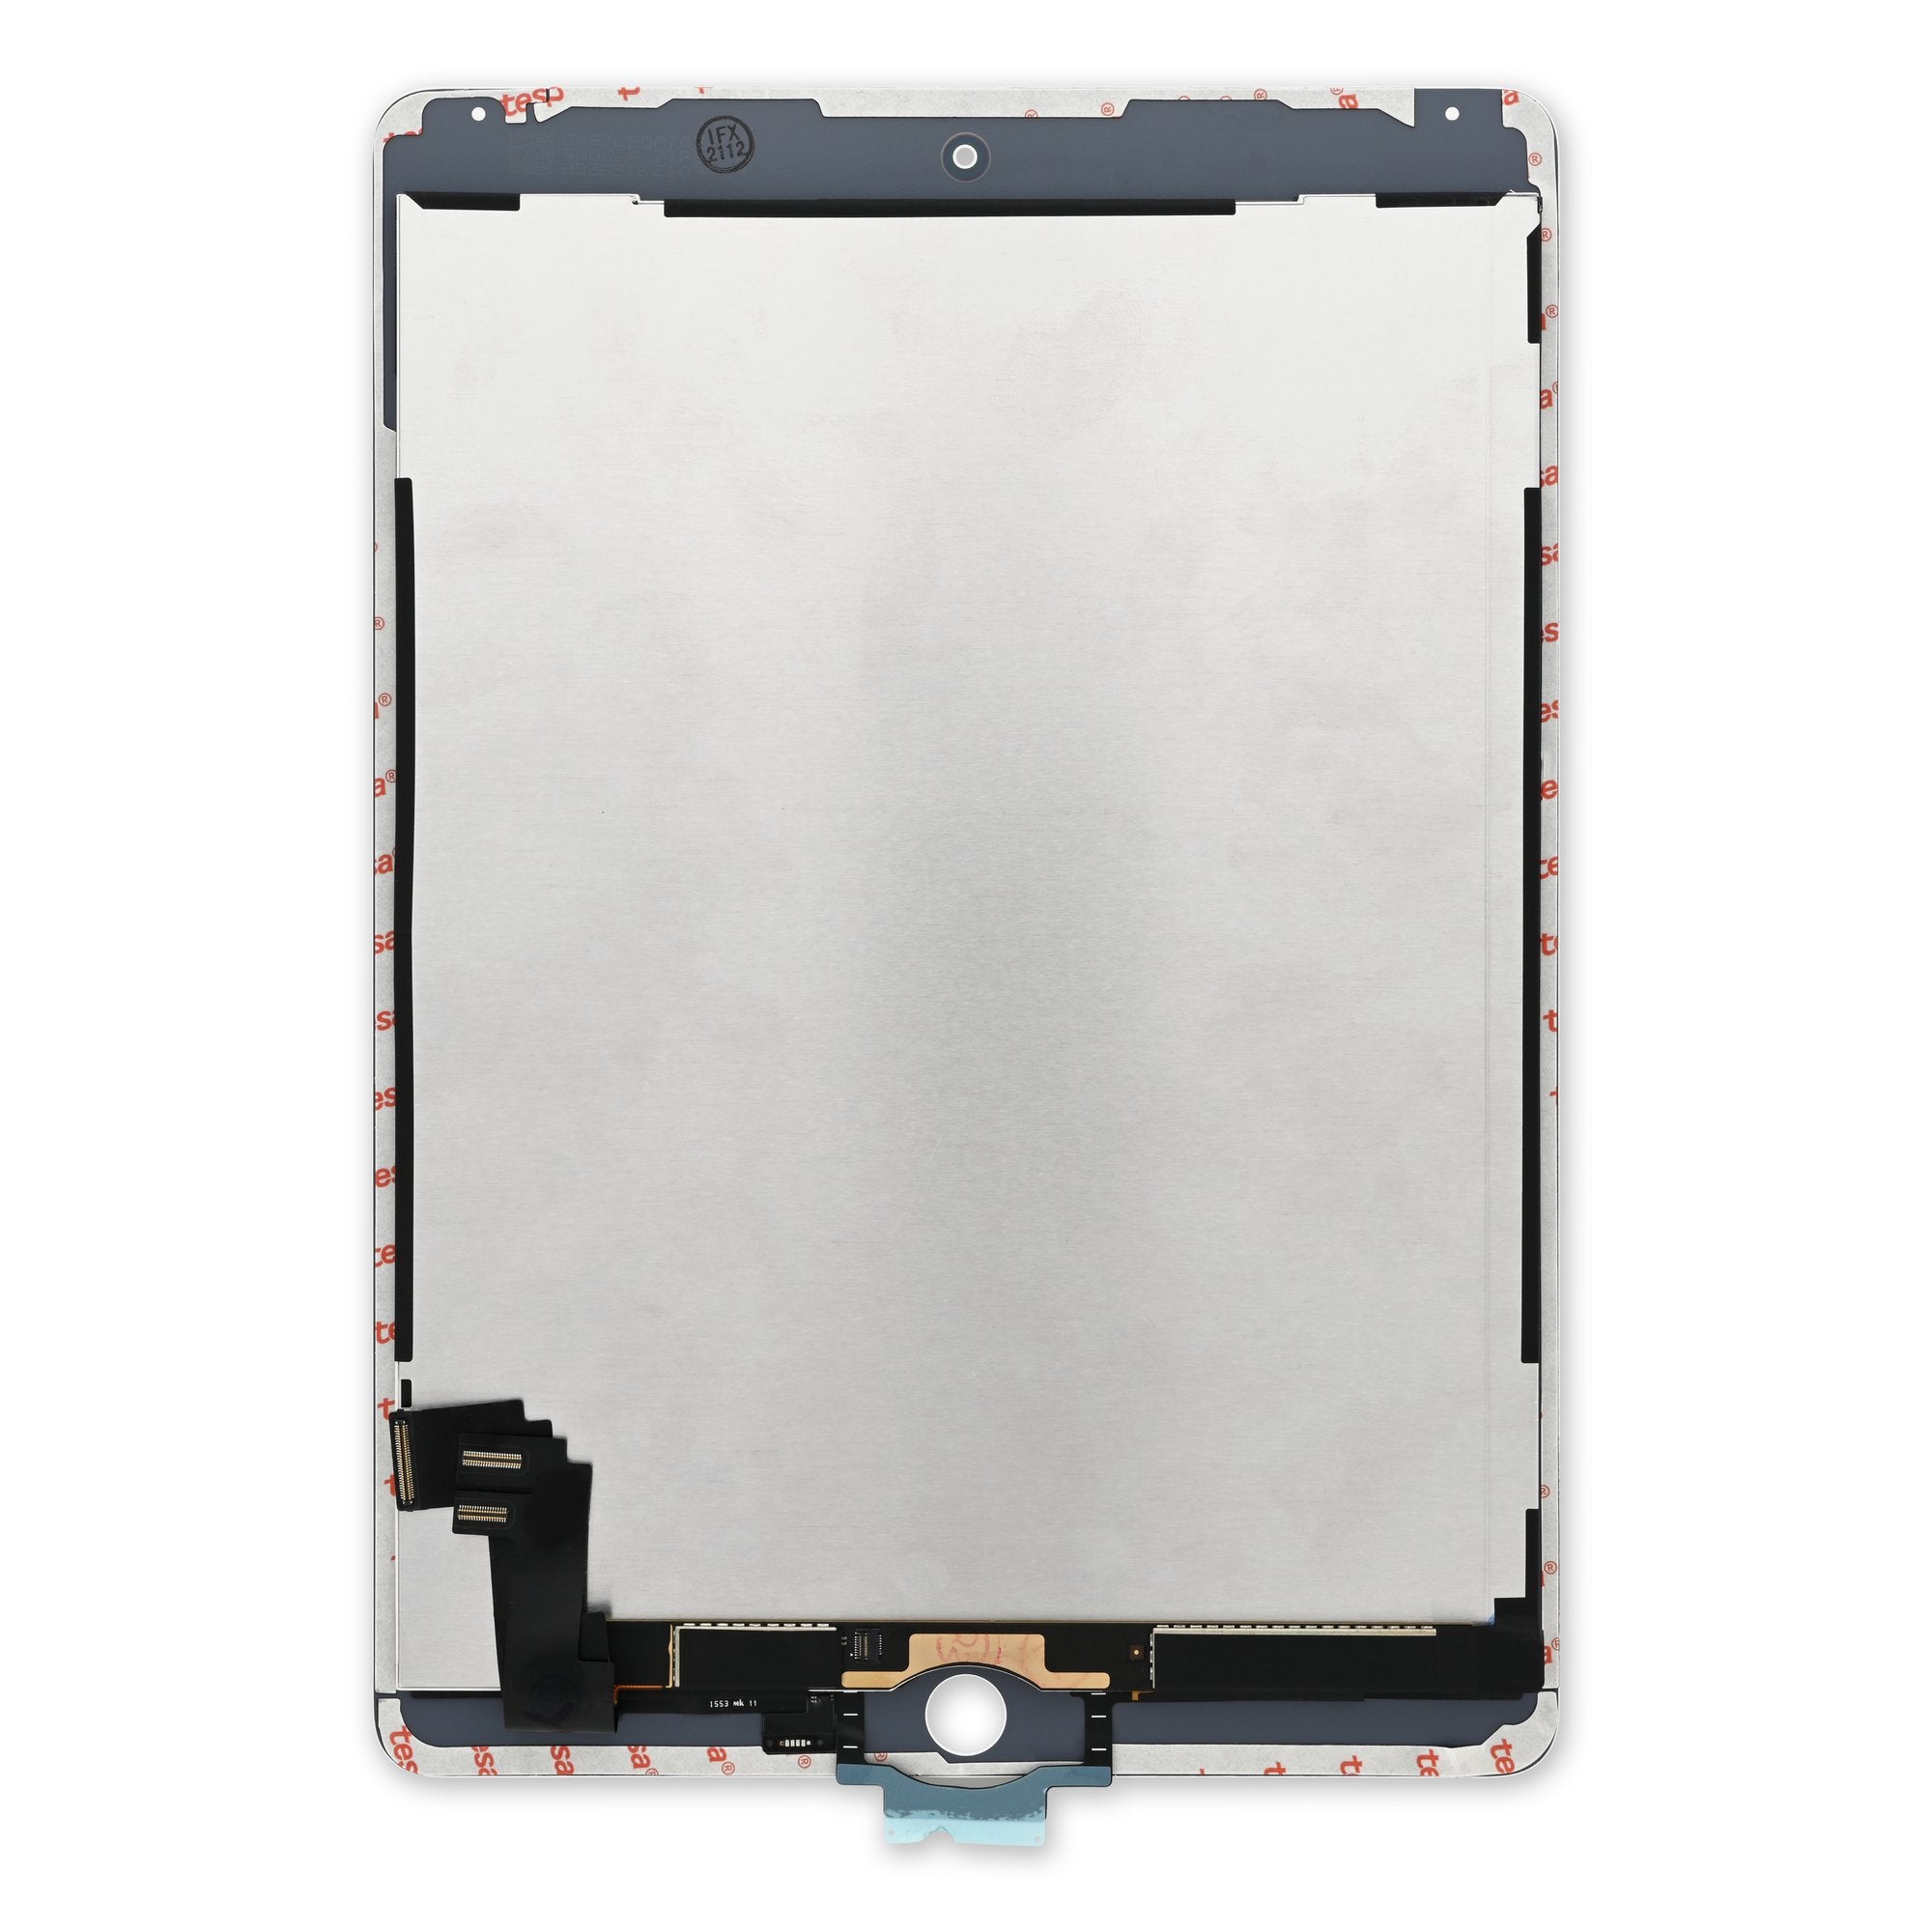 iPad Air 2 LCD and Touch Screen Digitiser Assembly – Tech Repair Lab